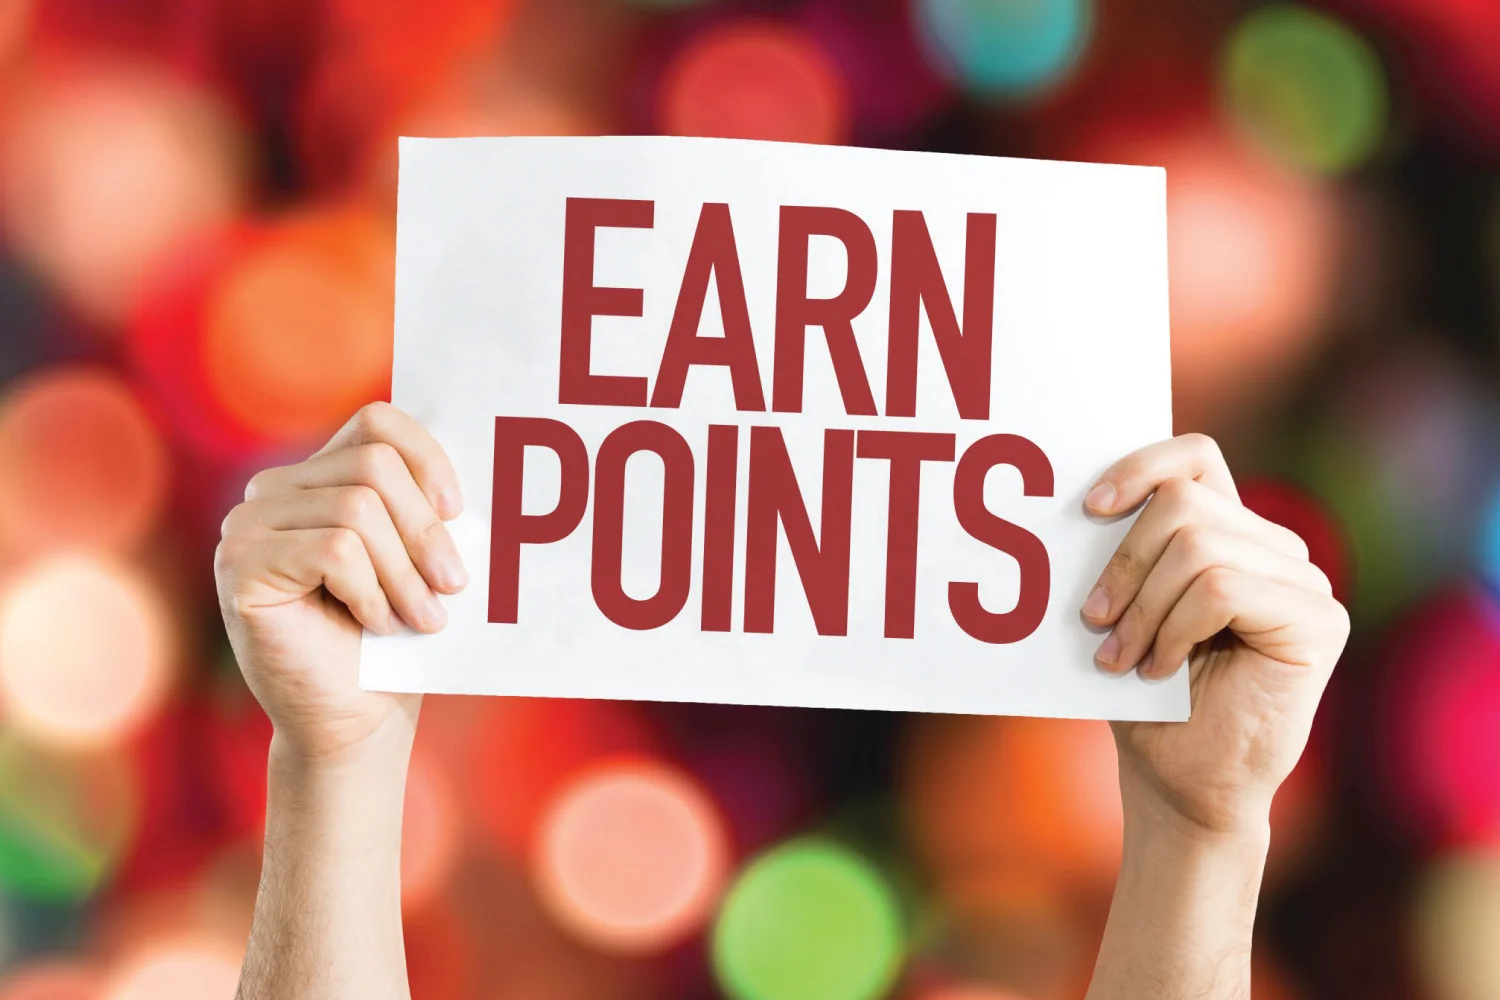 hands holding up a sign reading "earn points" over blurred background